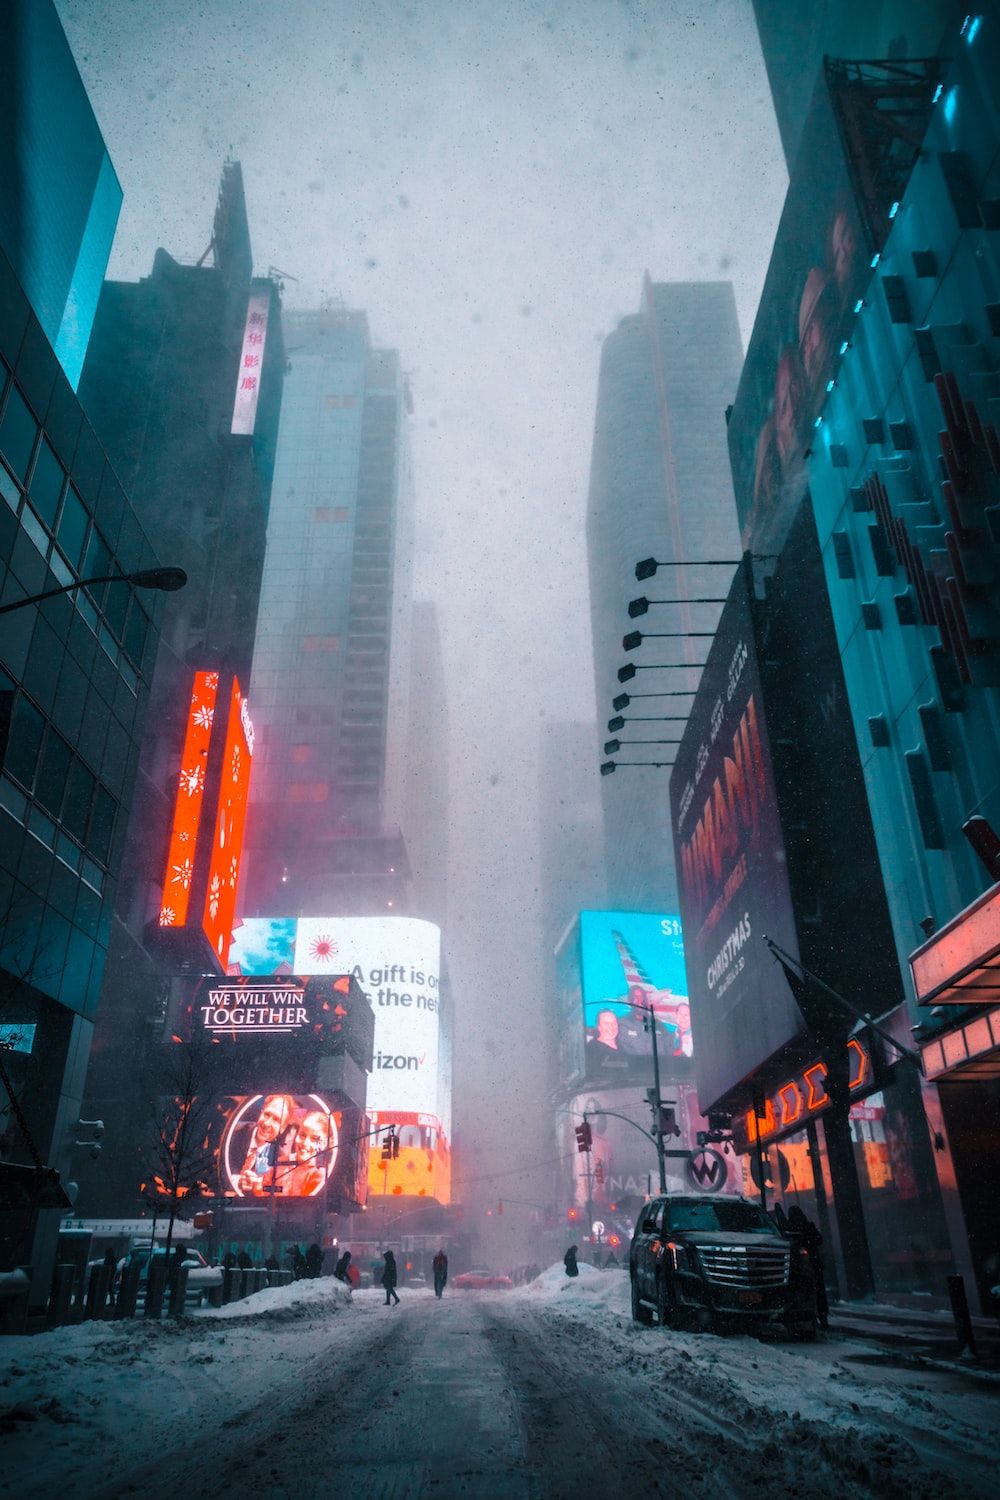 A city street is covered in snow - New York